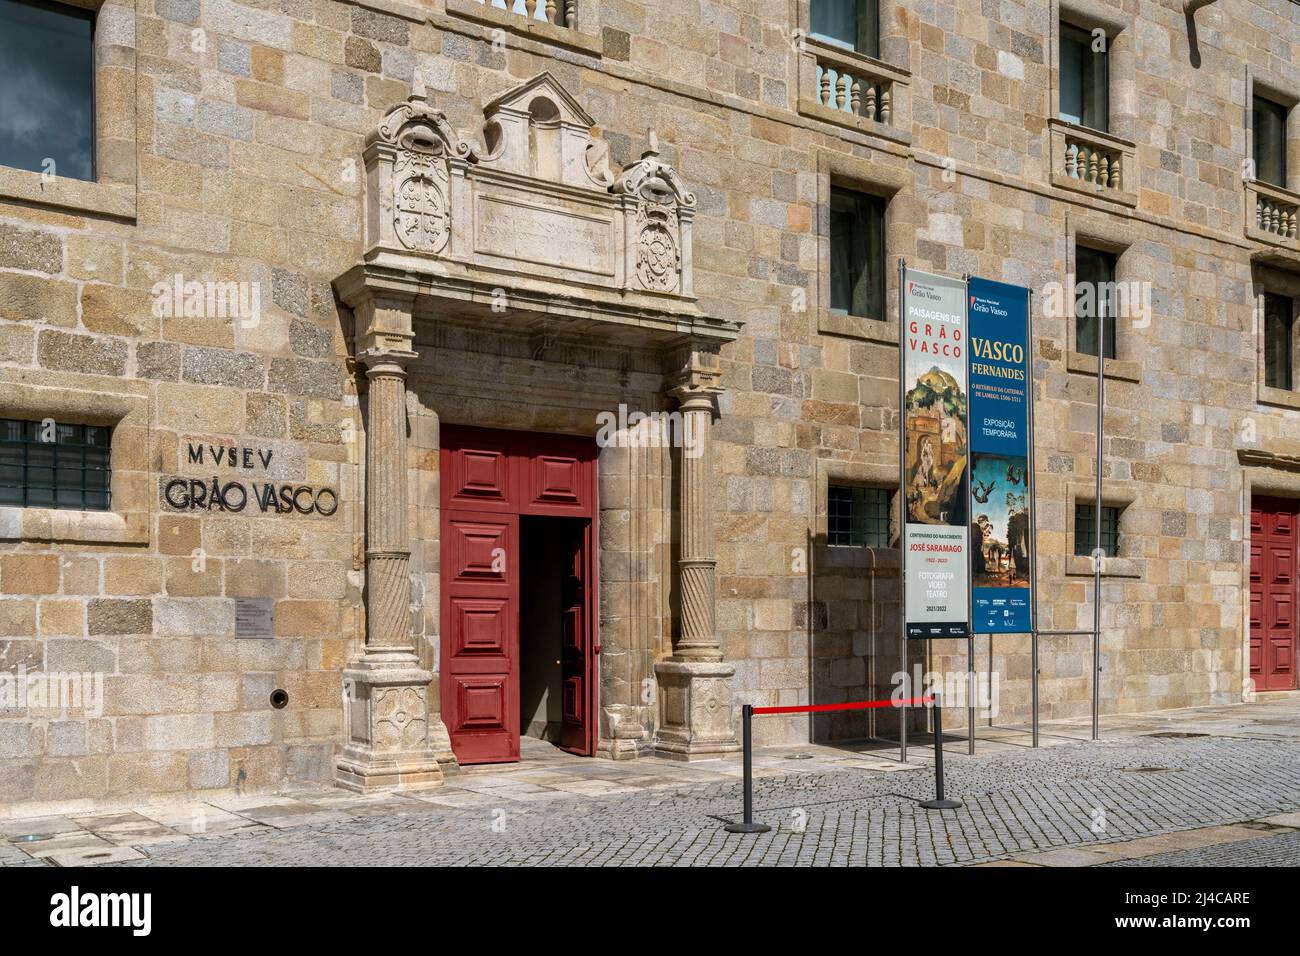 Viseu, Portugal - 9 April, 2022: a view of the entrance Grao Vasco national Museum in the old city center of Viseu Stock Photo